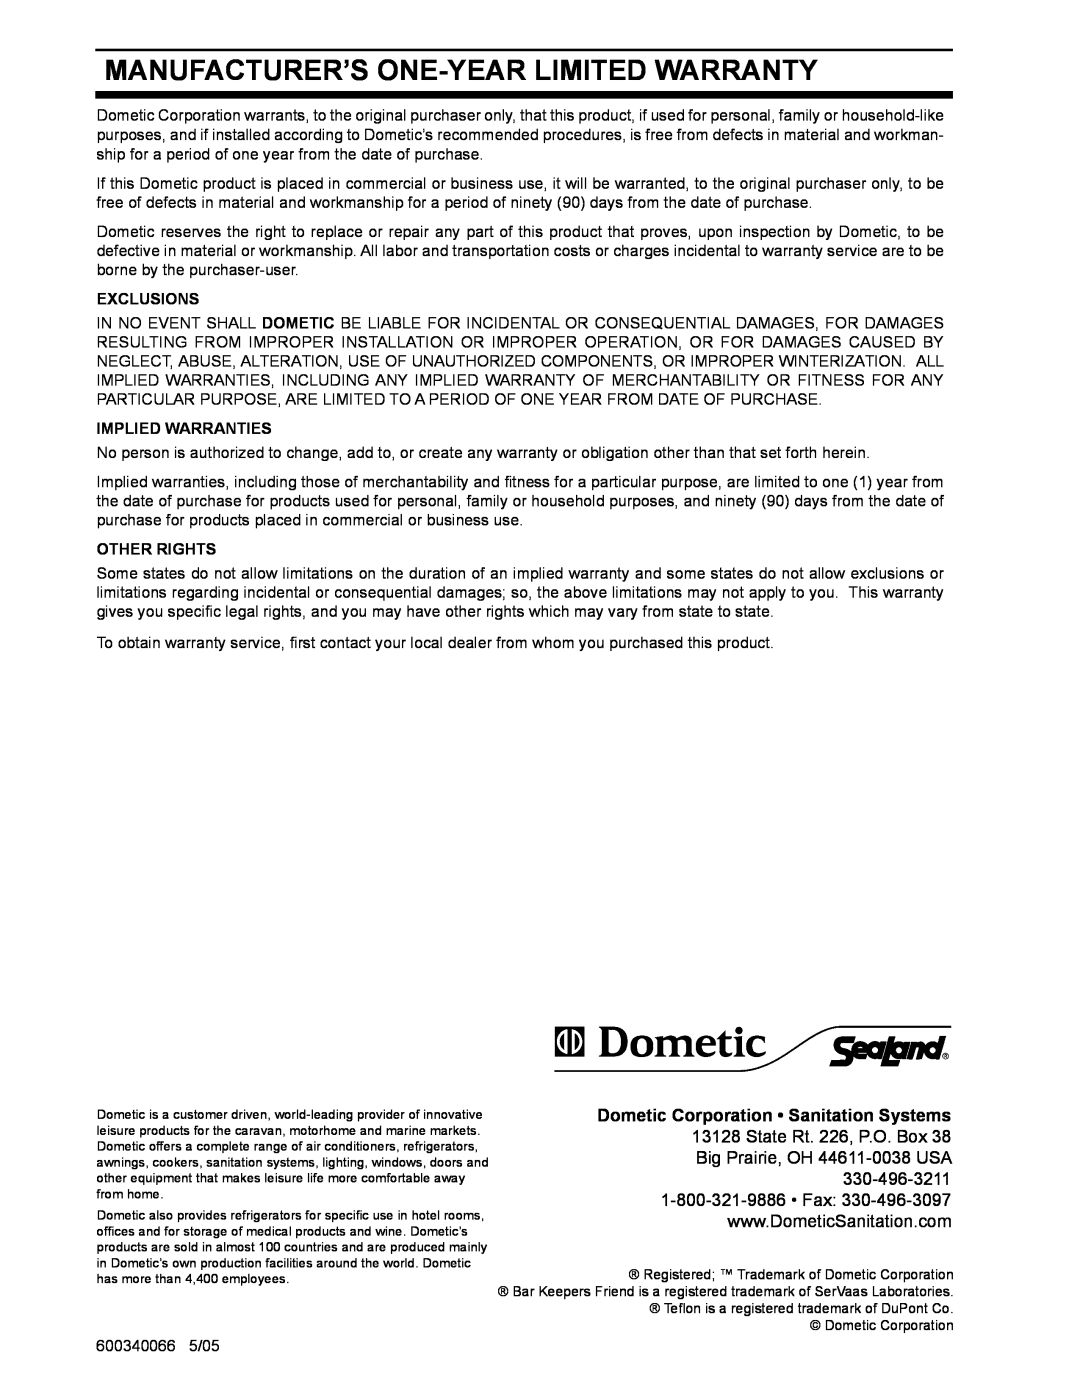 Dometic 706 Manufacturer’S One-Yearlimited Warranty, Dometic Corporation Sanitation Systems, State Rt. 226, P.O. Box 